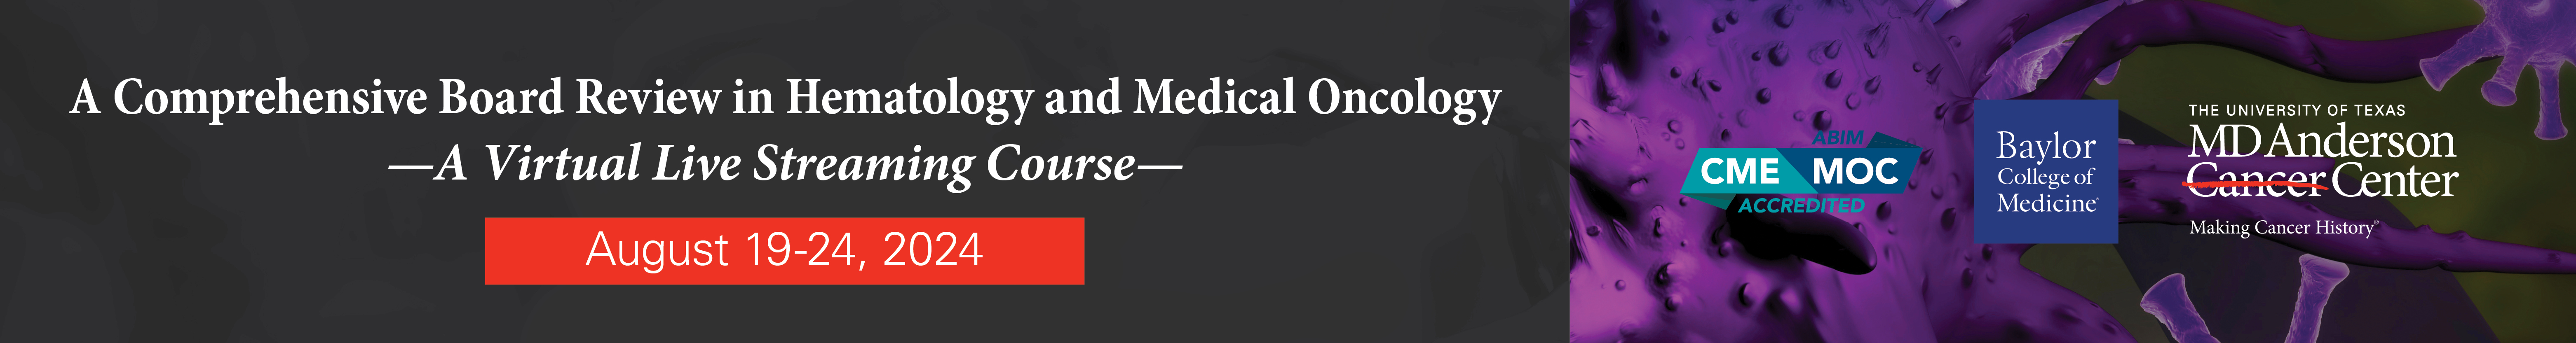 A Comprehensive Board Review in Hematology and Medical Oncology Banner